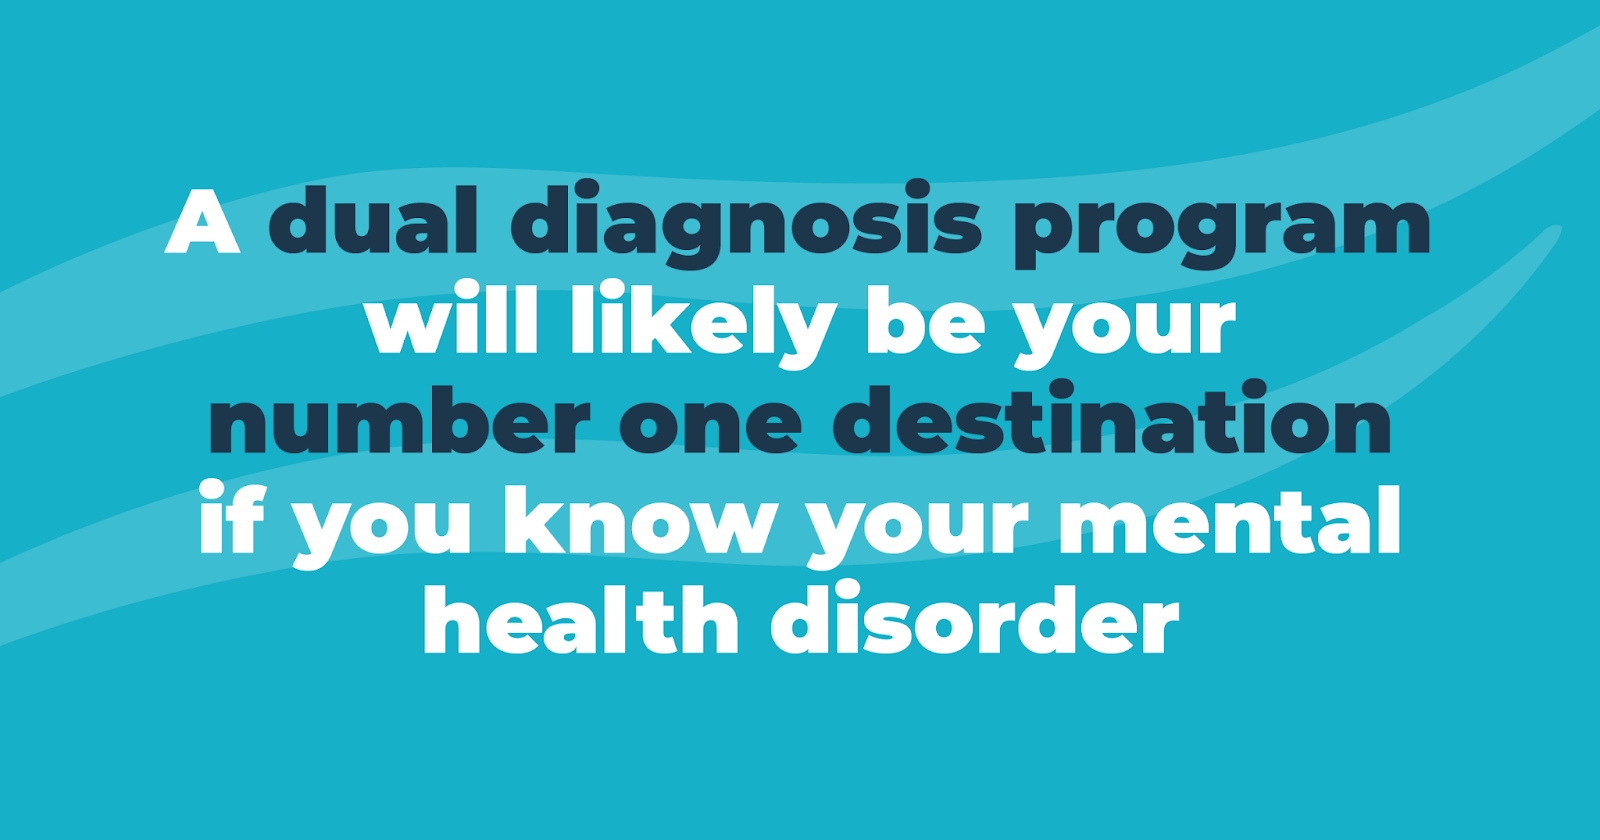 a dual diagnosis program will likely be your number one destination if you know your mental health disorder 